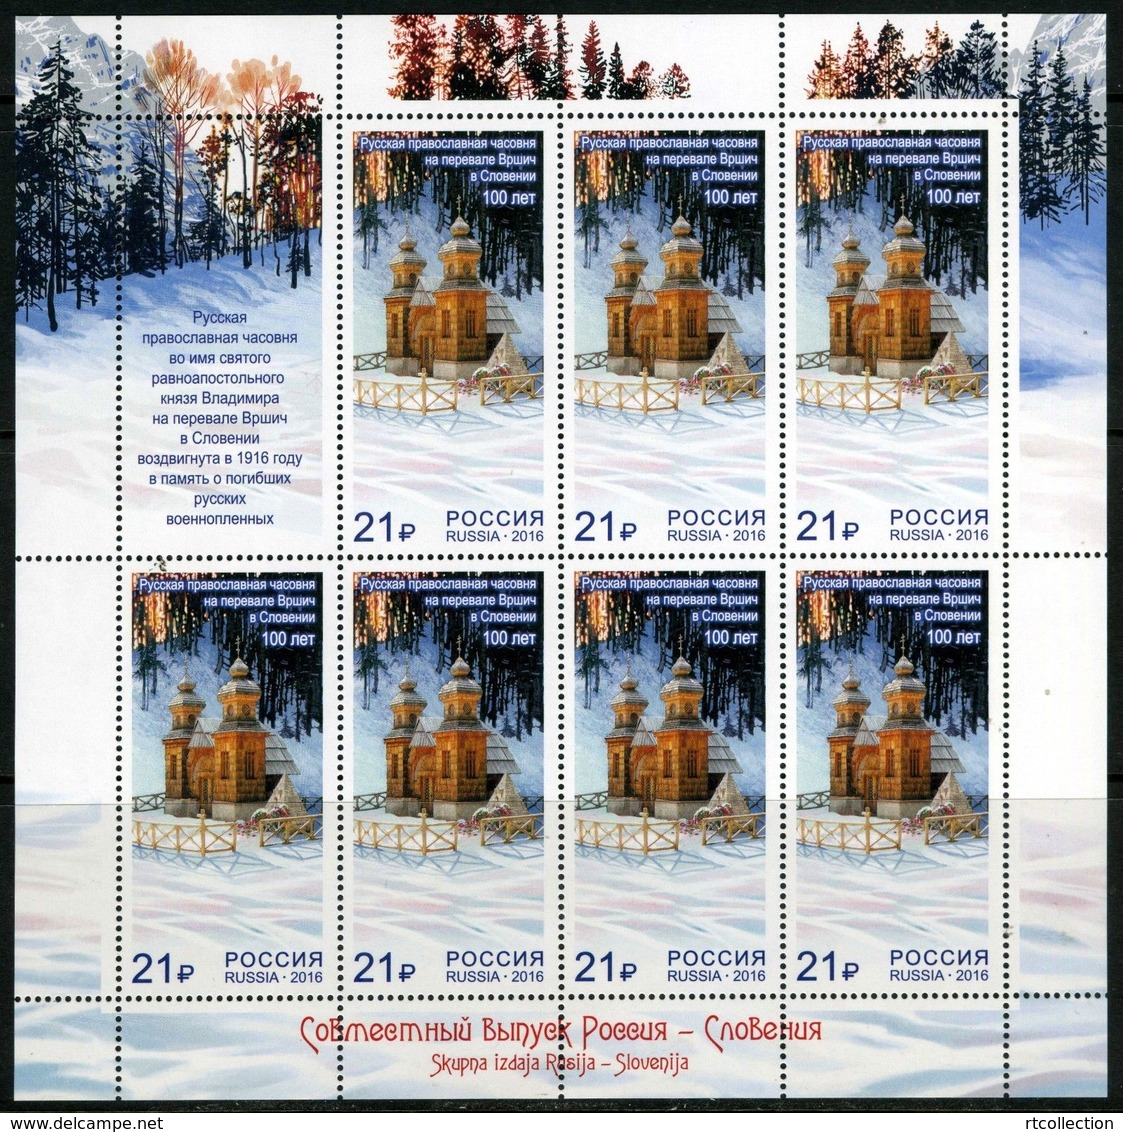 Russia 2016 Sheet Joint Issue Slovenia 100th Anniv Russian Orthodox Chapel Architecture Churches Cathedrals Stamps MNH - Feuilles Complètes